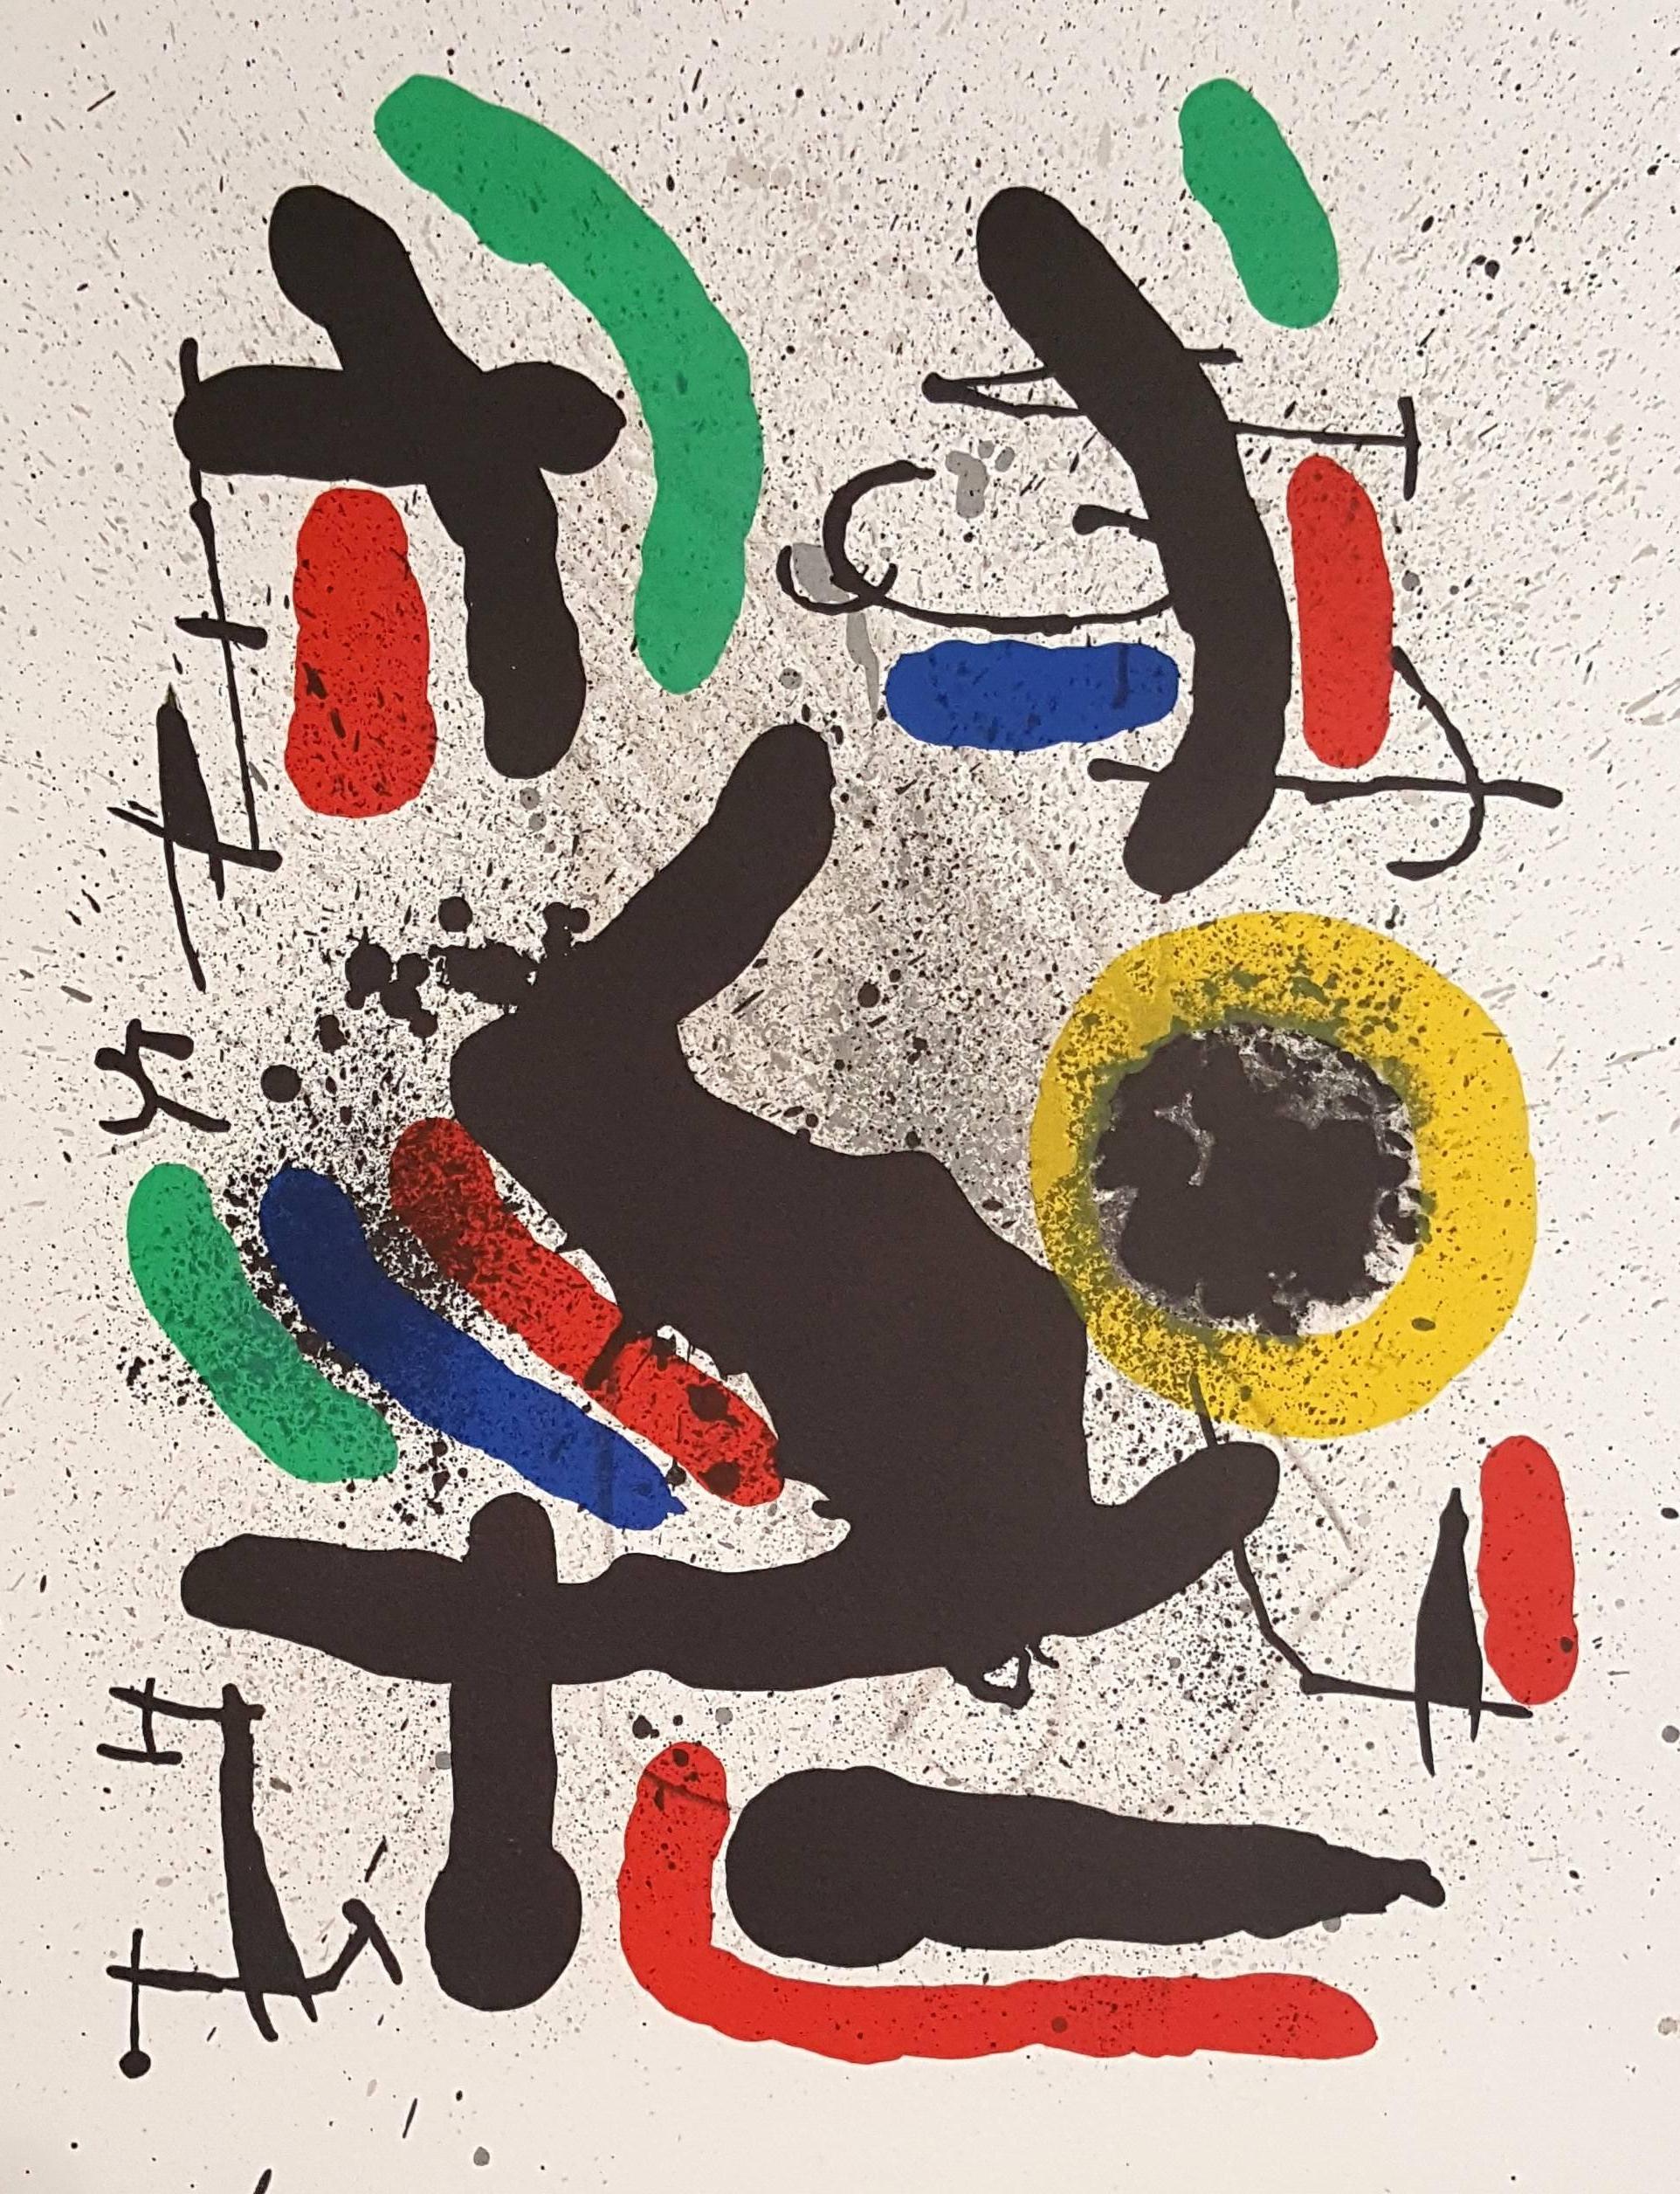 Joan MIRO
Liberty of liberties

Original lithograph, 1971
Handsigned by the artist
Numbered / 125 copies
On vellum paper, size 35 x 47 cm (c. 13,7 x 18,5 in)
Very good condition

REFERENCE : Catalog raisonné Miro lithograph vol.4 #748